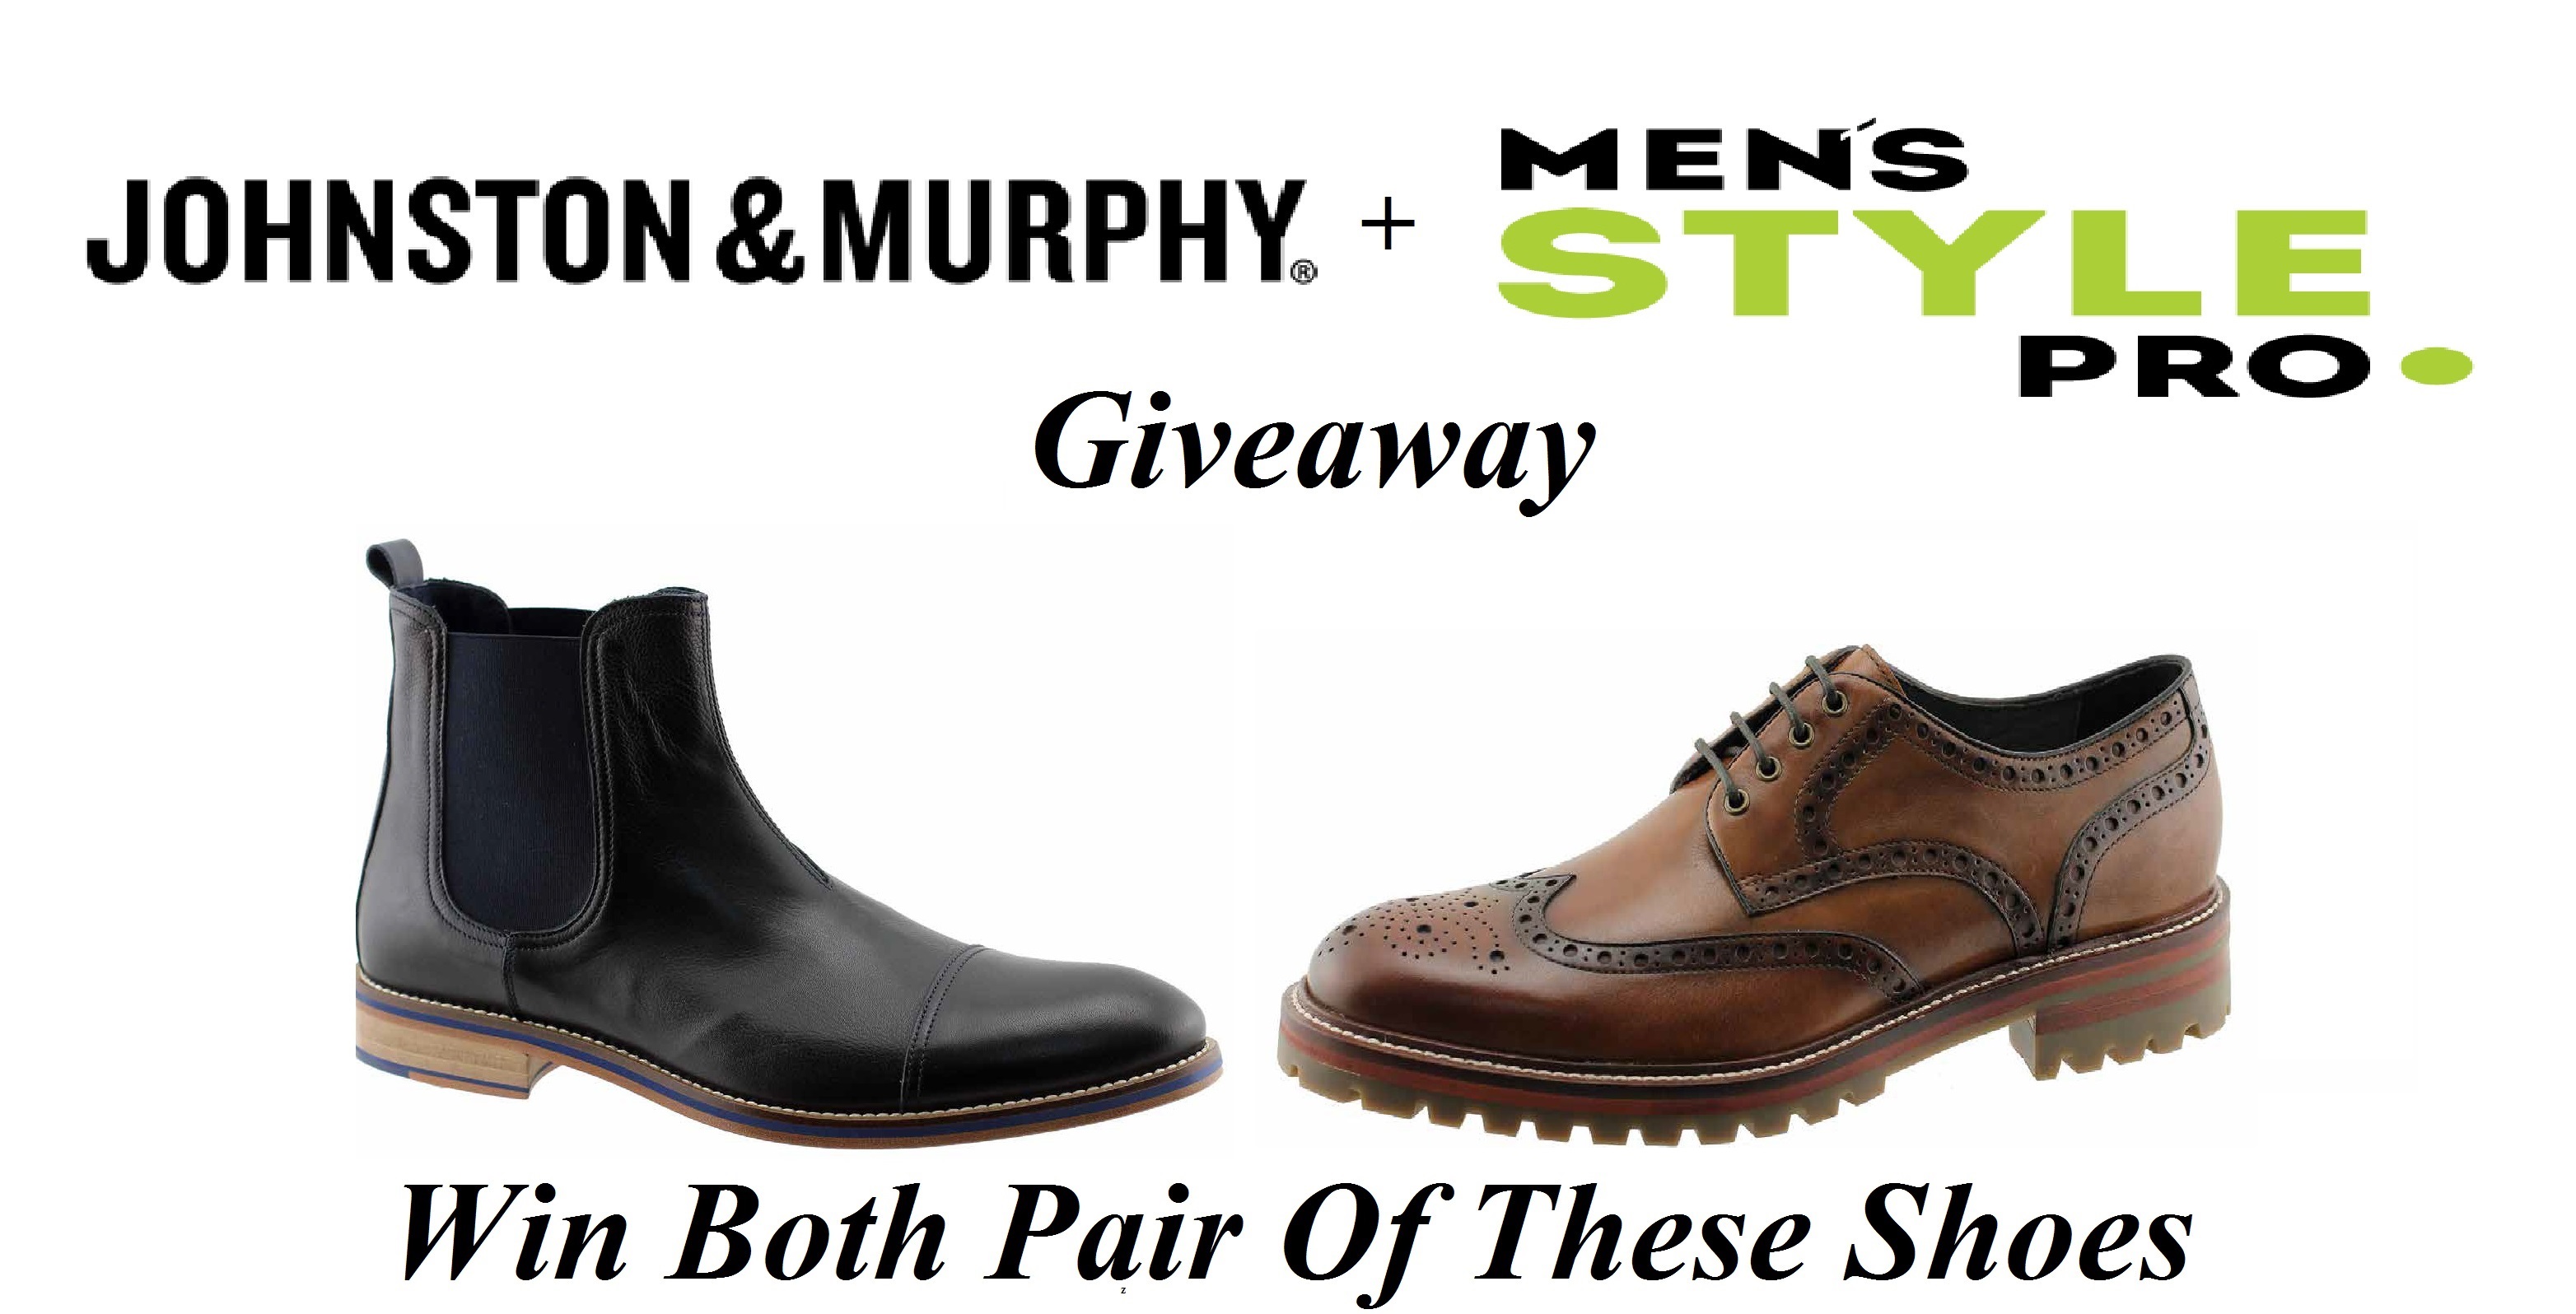 Johnston & Murphy Holiday Giveaway via Men's Style Pro